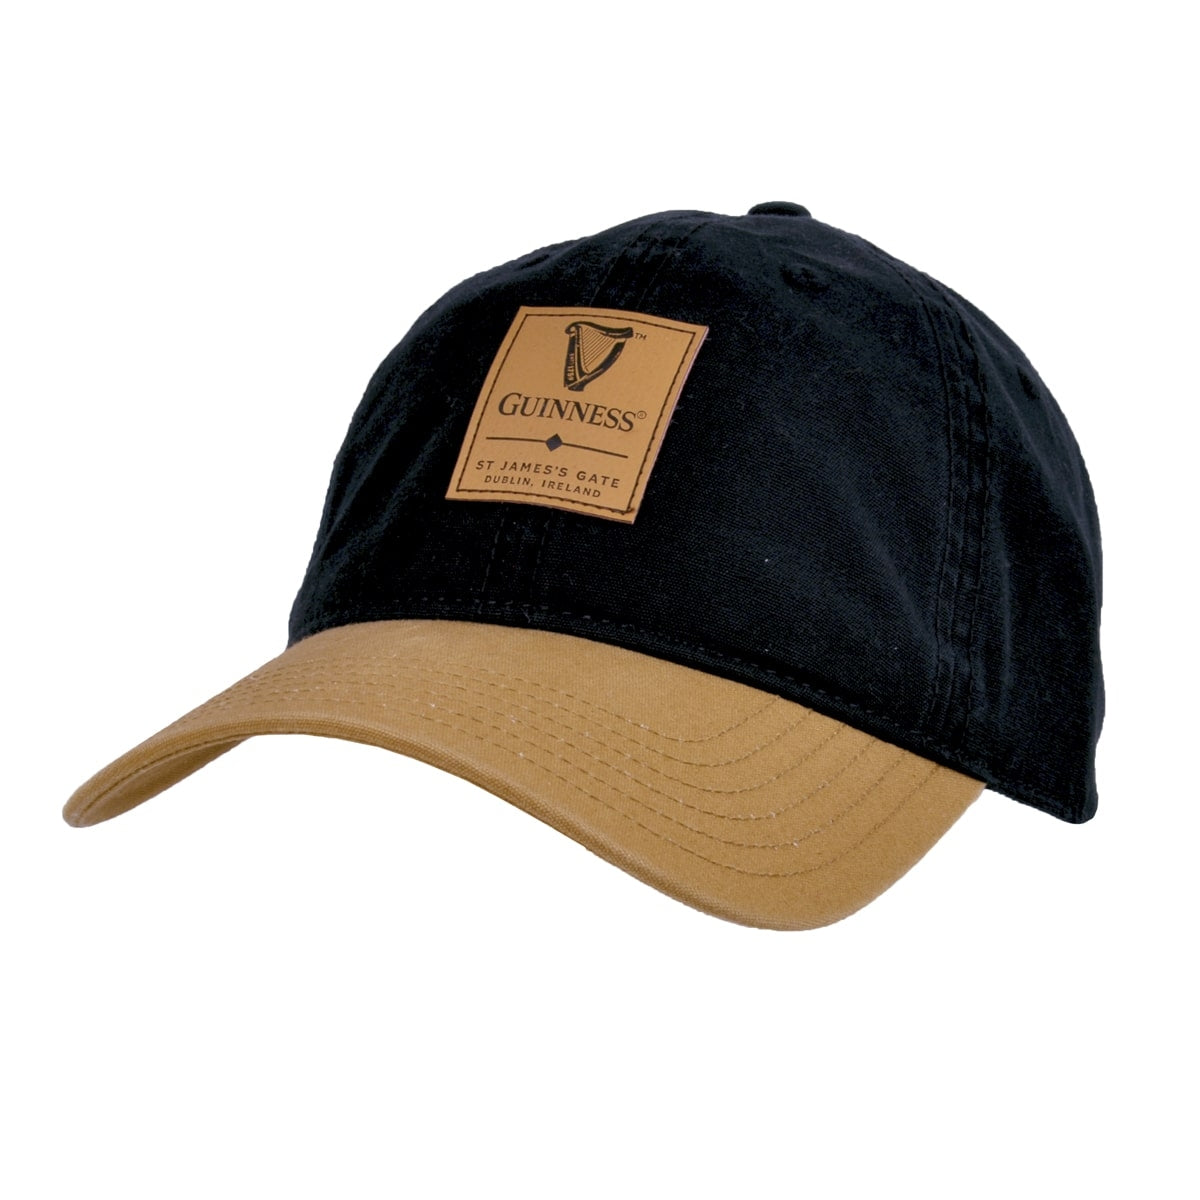 A Guinness Premium Black & Camel with Leather Patch Cap in a black and caramel colorway, featuring the iconic Guinness UK logo.